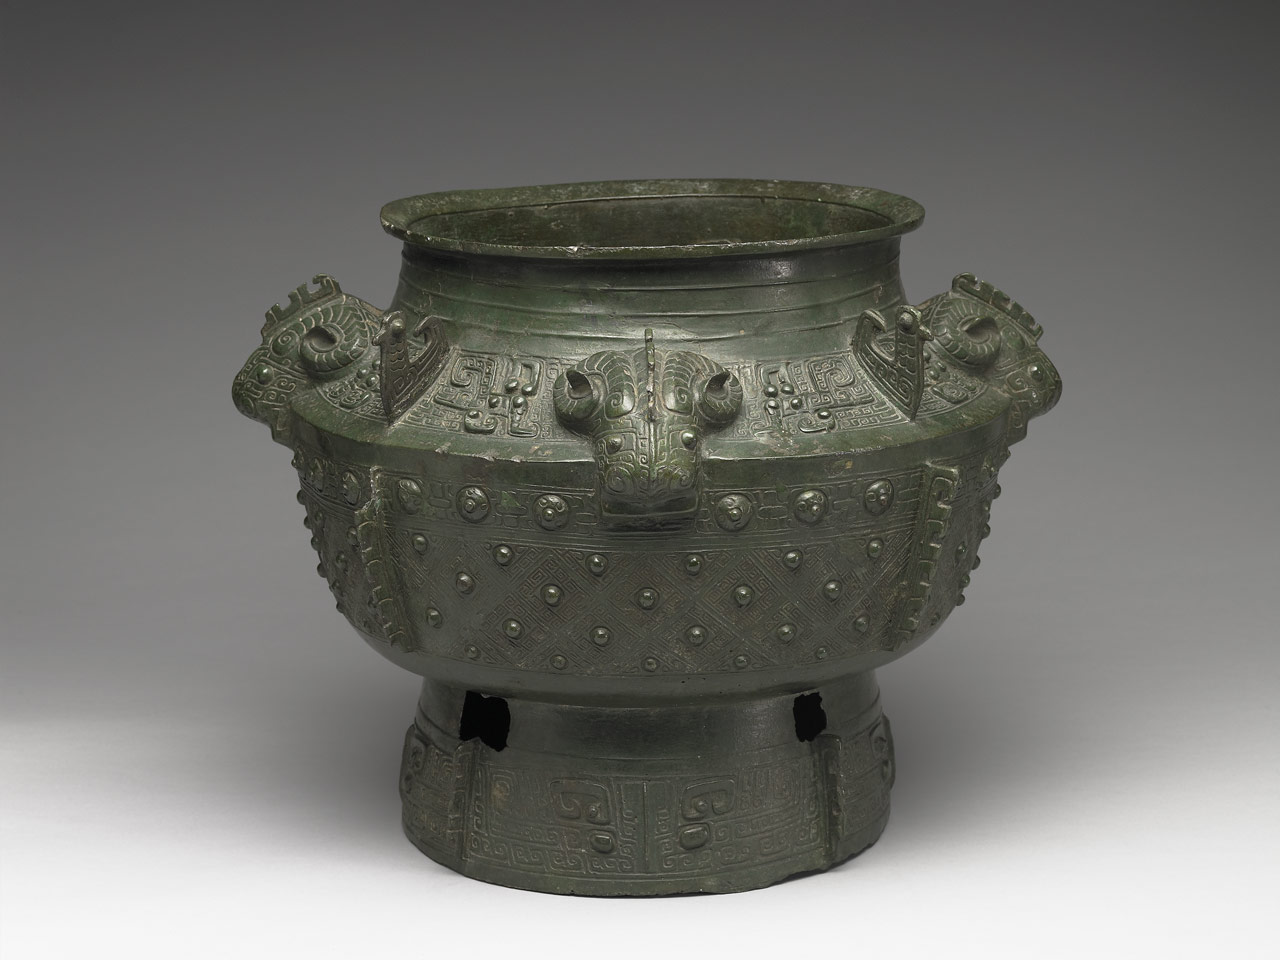 Lei wine vessel with sheep heads, lozenge and knob pattern, Late Shang Dynasty